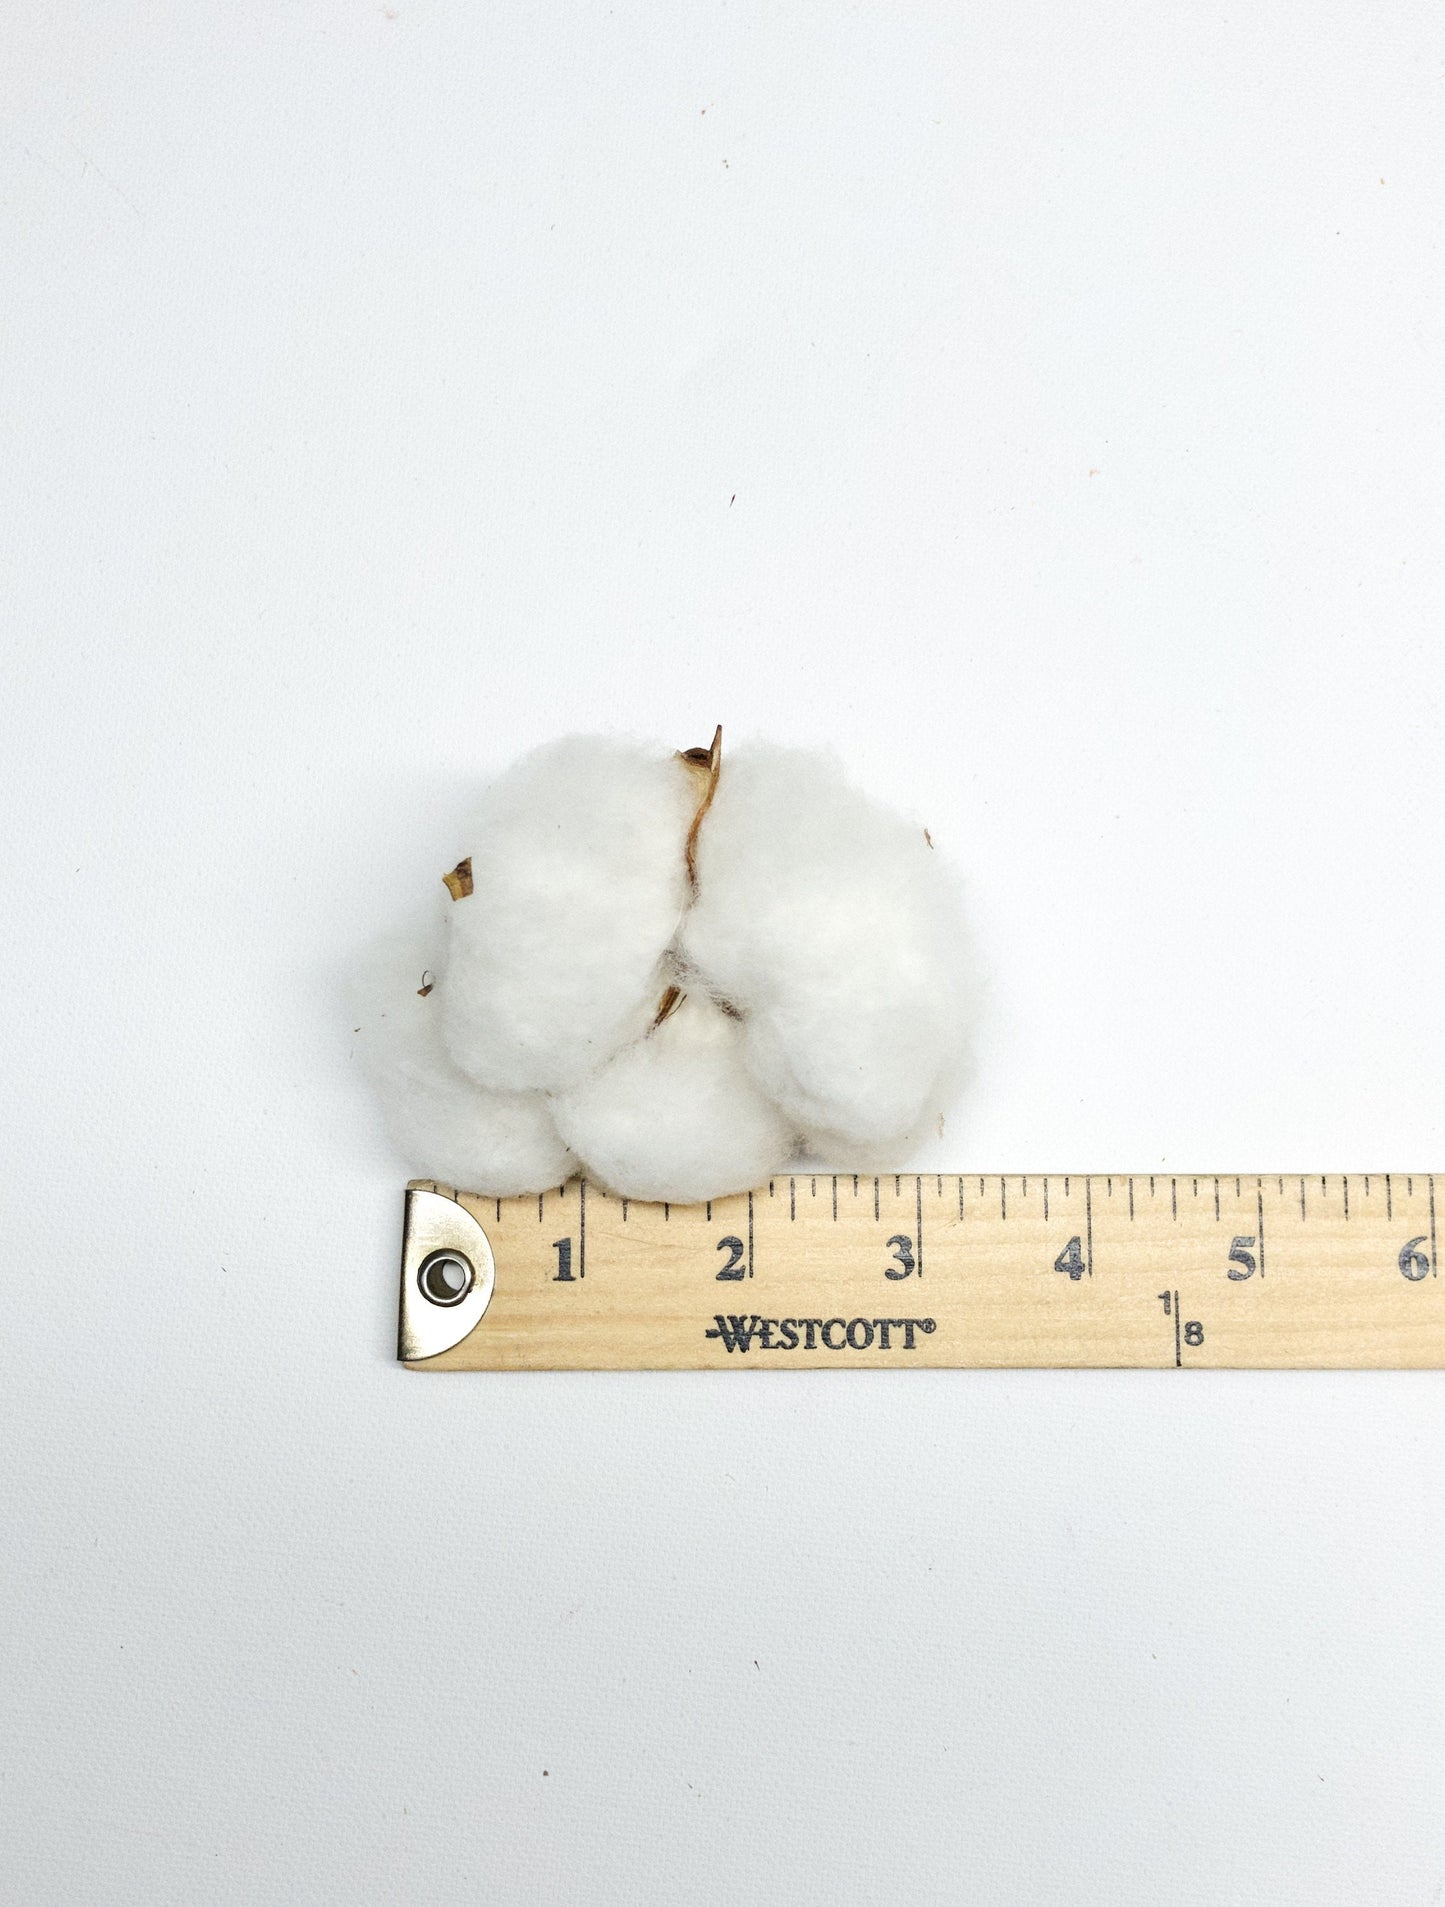 6 Cotton Heads, Natural, Dried, Wreath DIY, White Flower, Photography Props, Balls, Cotton Branch, Fall, Favors,